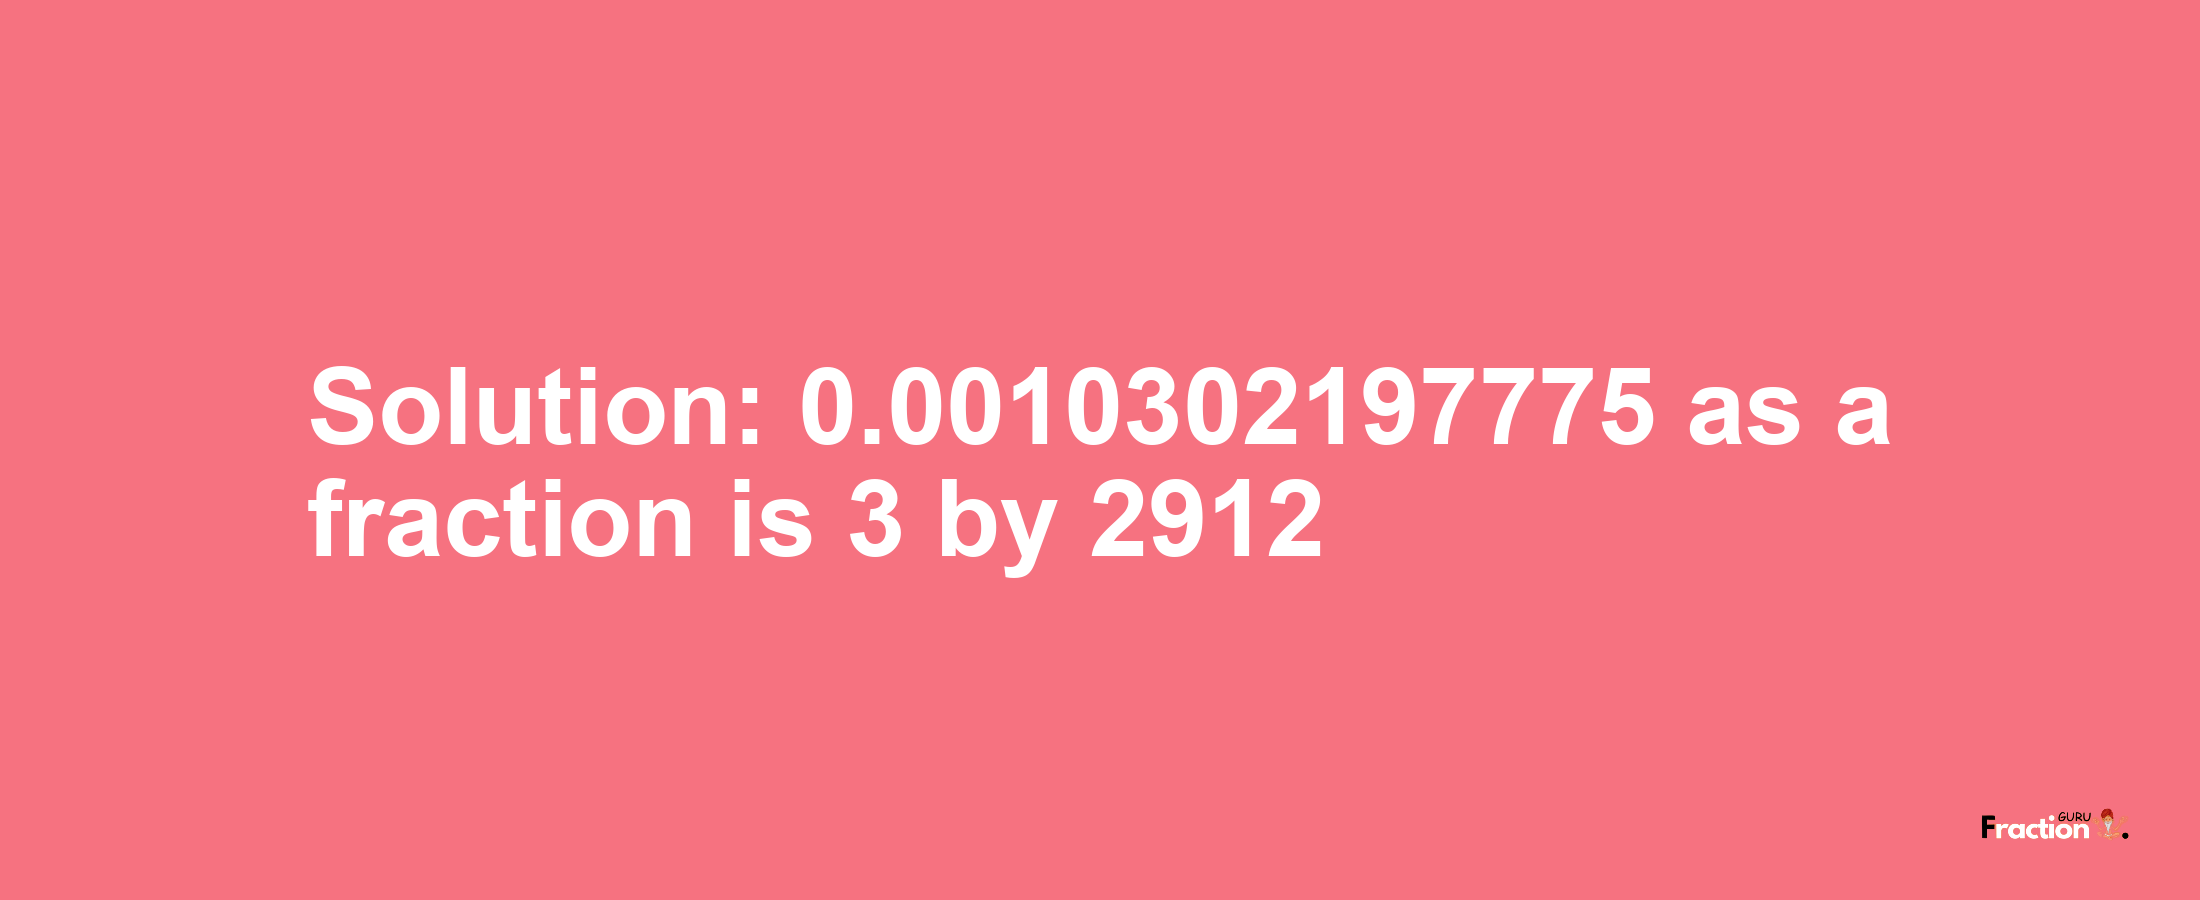 Solution:0.0010302197775 as a fraction is 3/2912